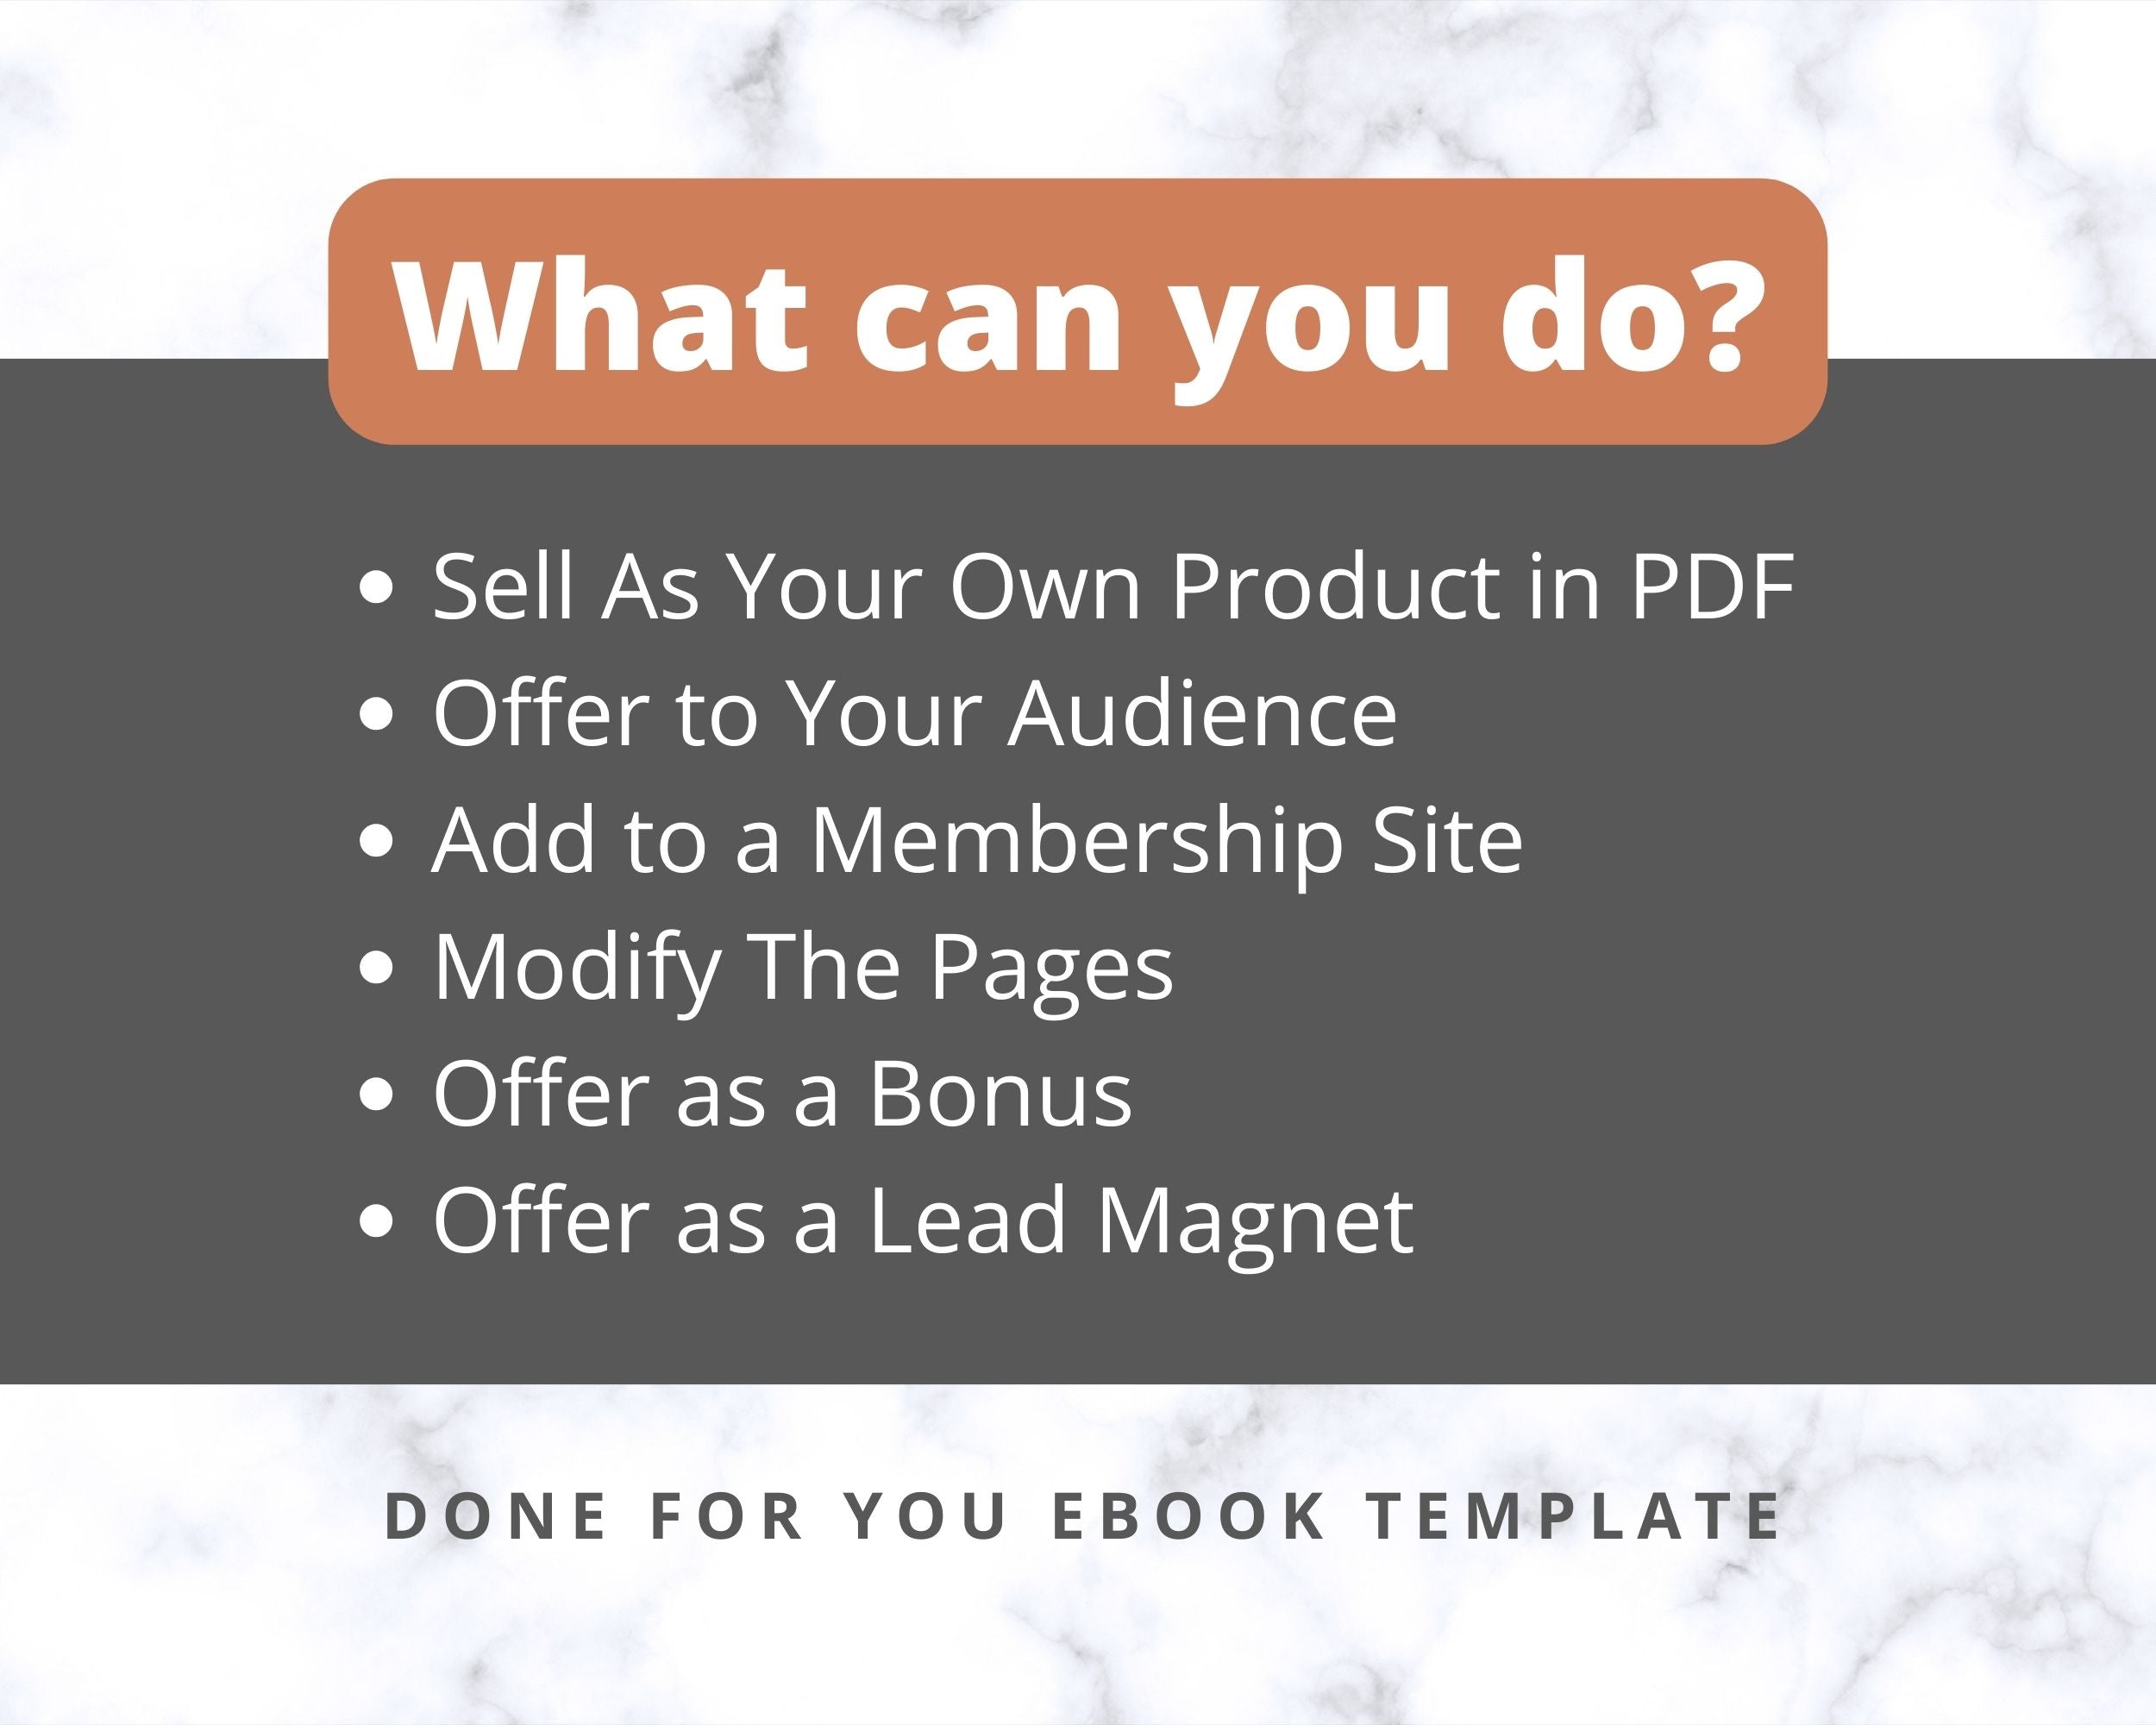 Editable Low Carb Diets For Fast Weight Loss Ebook | Done-for-You Ebook in Canva | Rebrandable and Resizable Canva Template